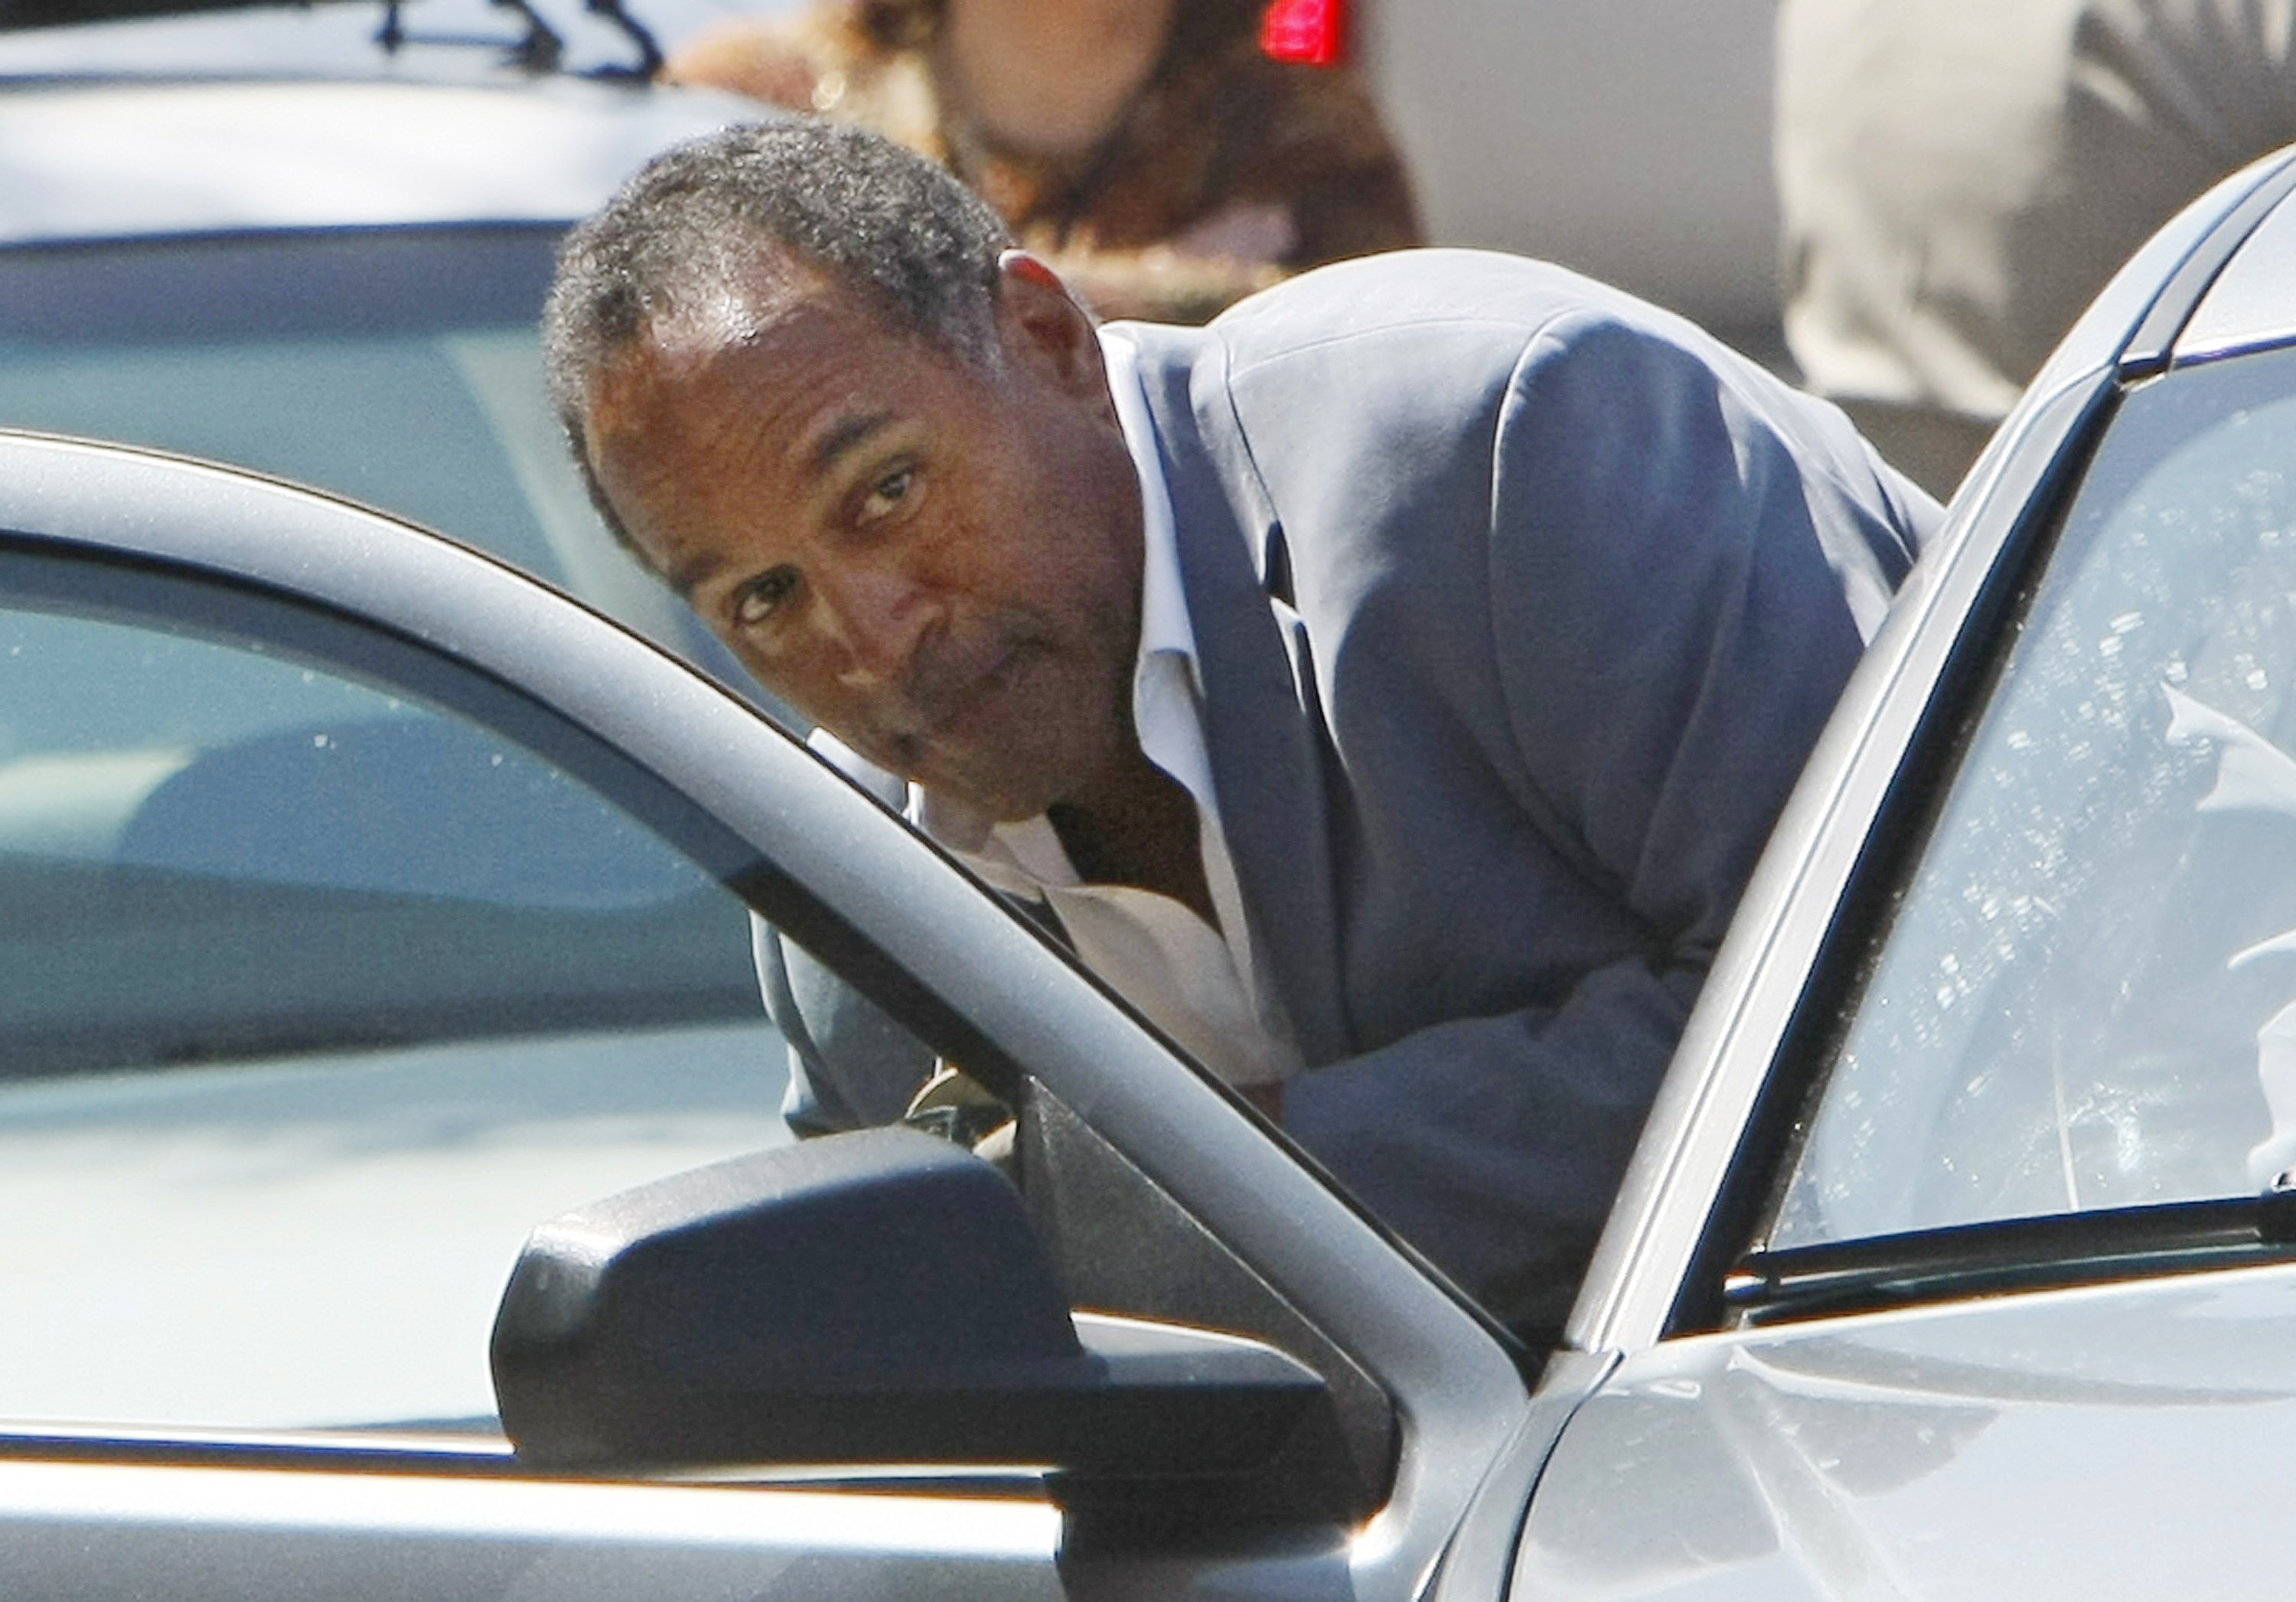 Former NFL football star O.J. Simpson ducks into his car outside the Clark County Detention Center in Las Vegas